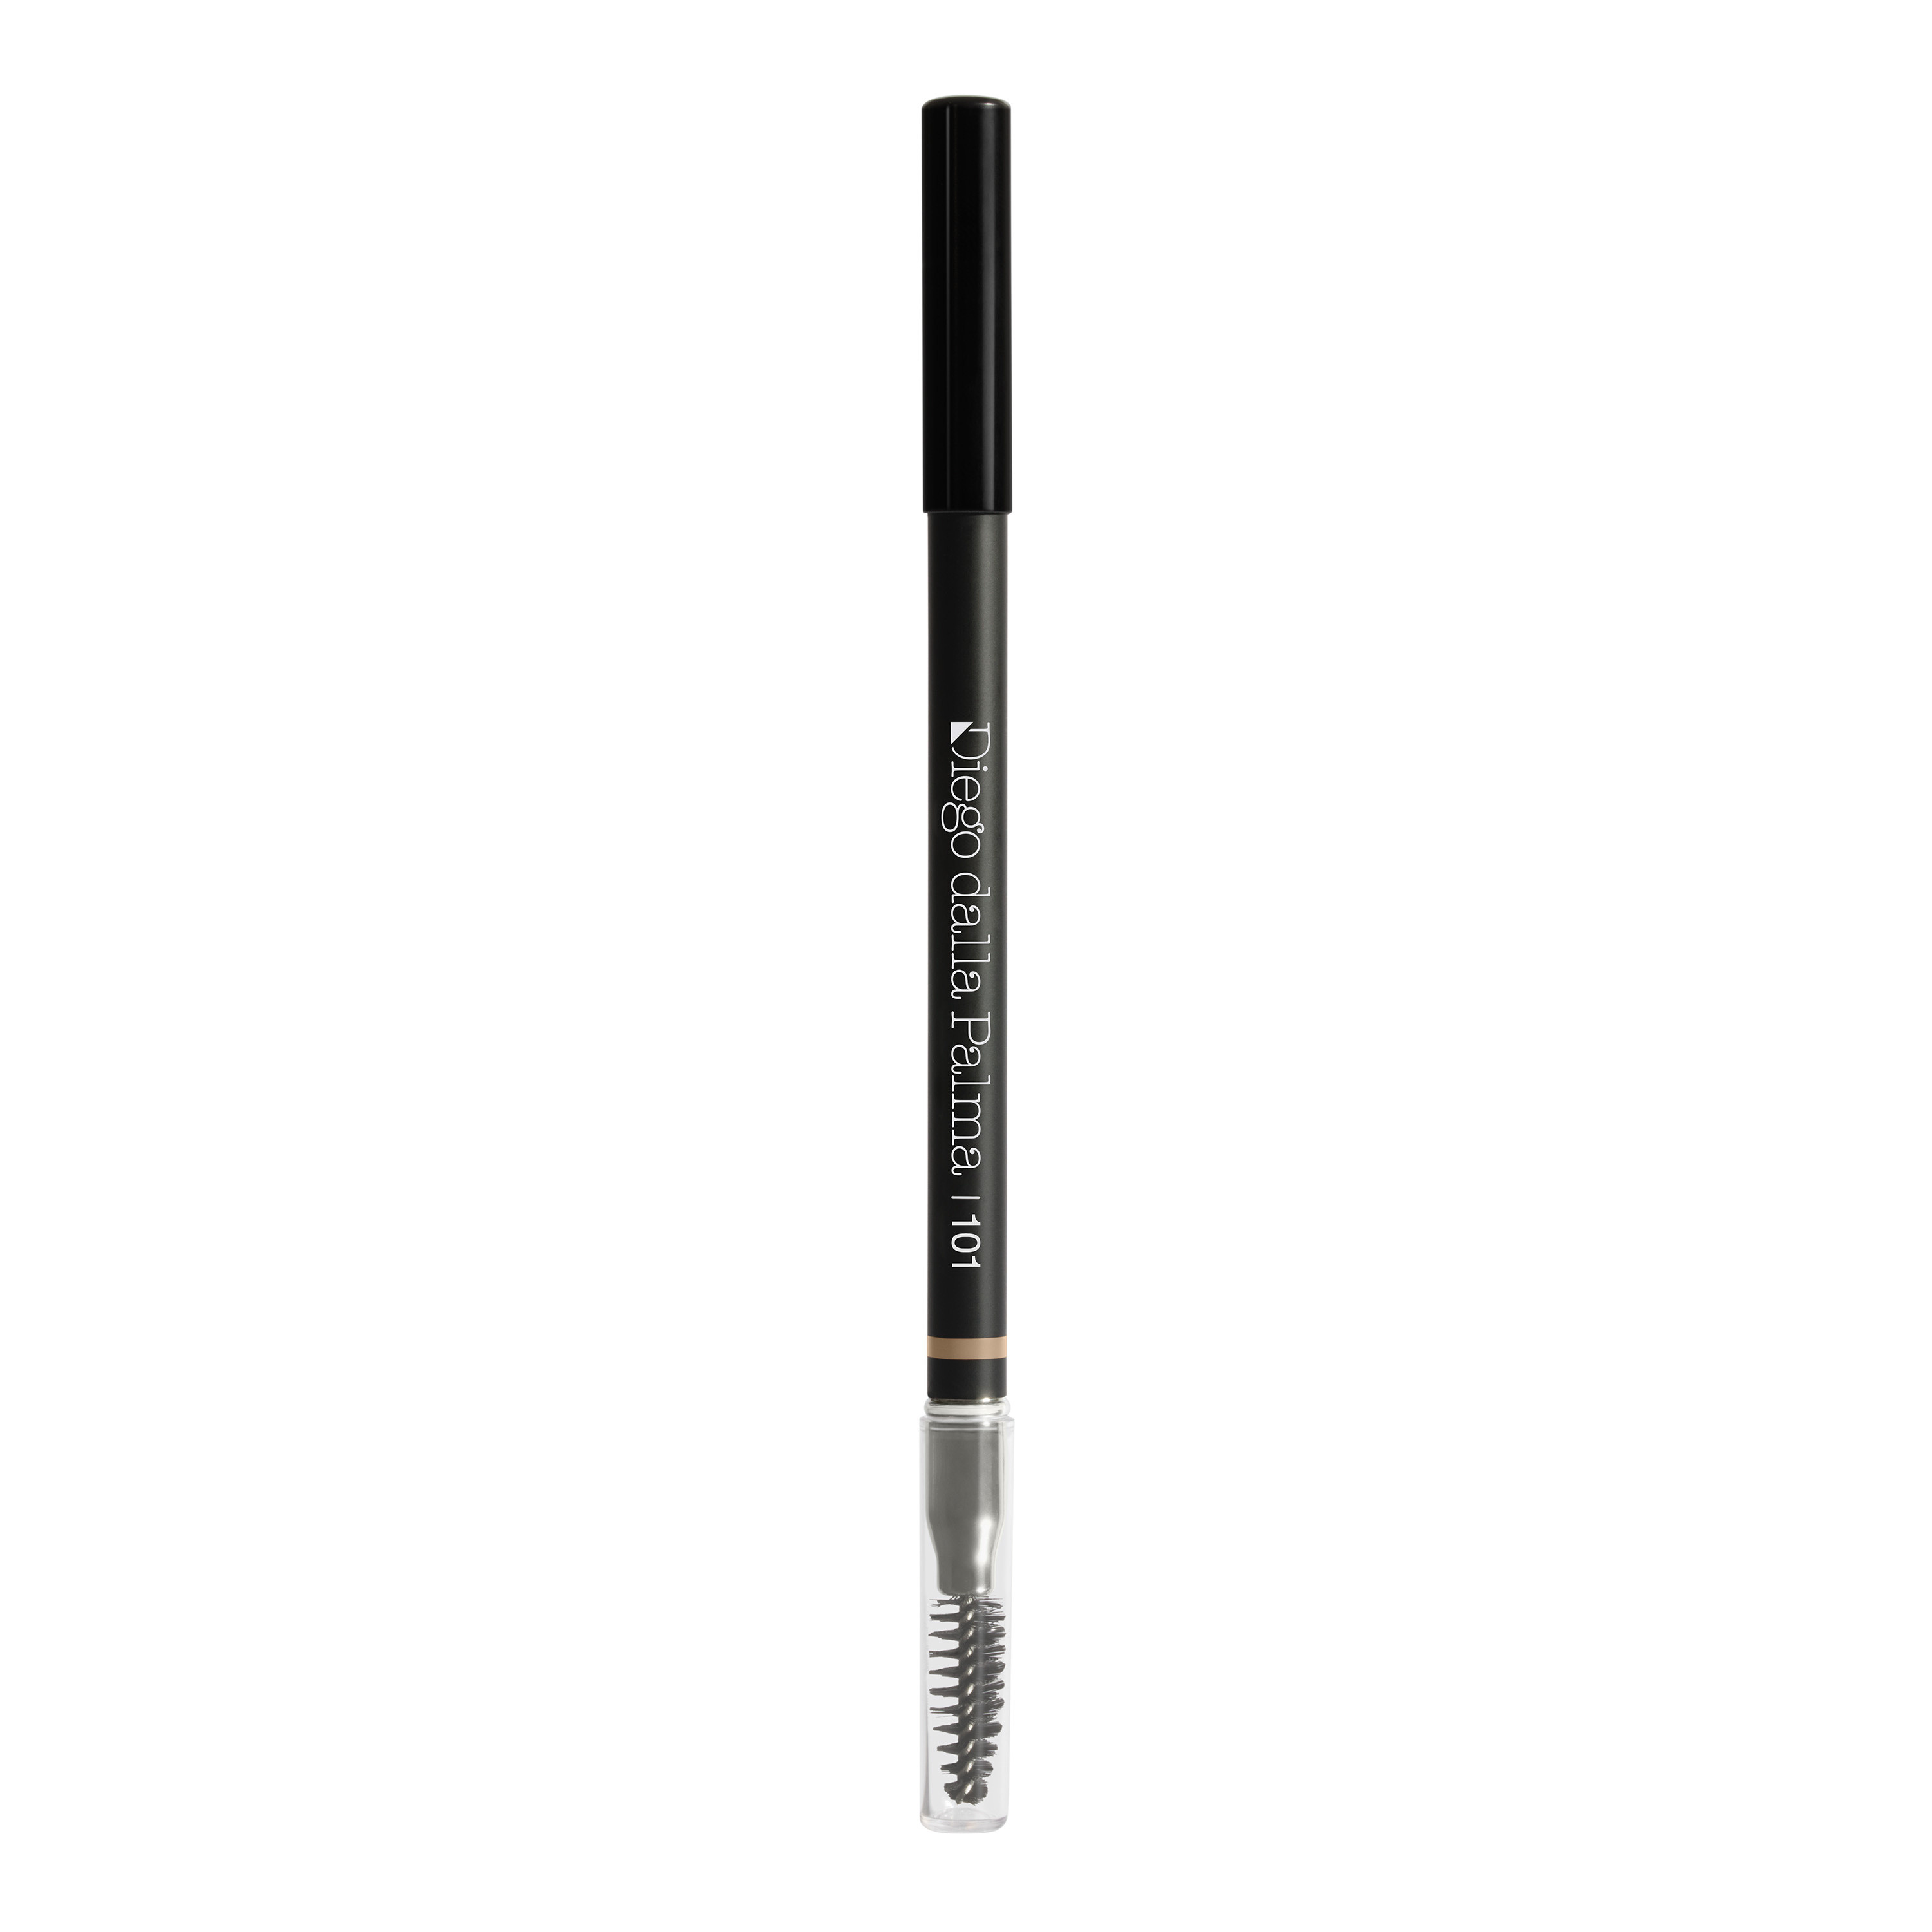 Waterproof Eyebrow Pencil - 101 Taupe, Dove Grey, large image number 1